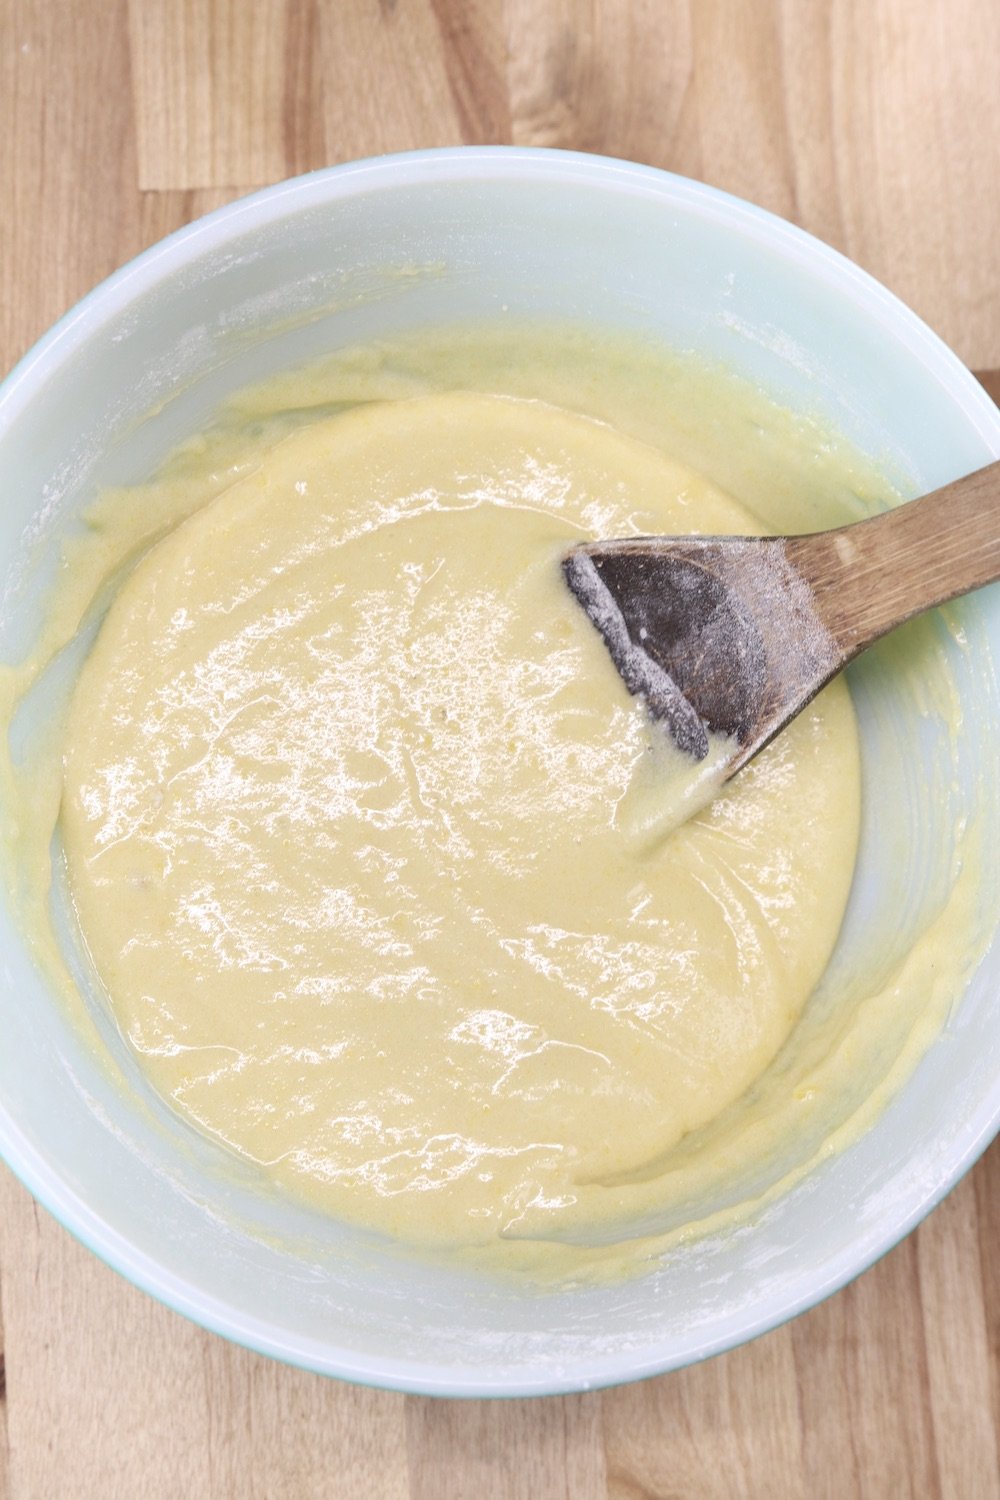 Batter for Pineapple upside down cake in a bowl with wood spoon